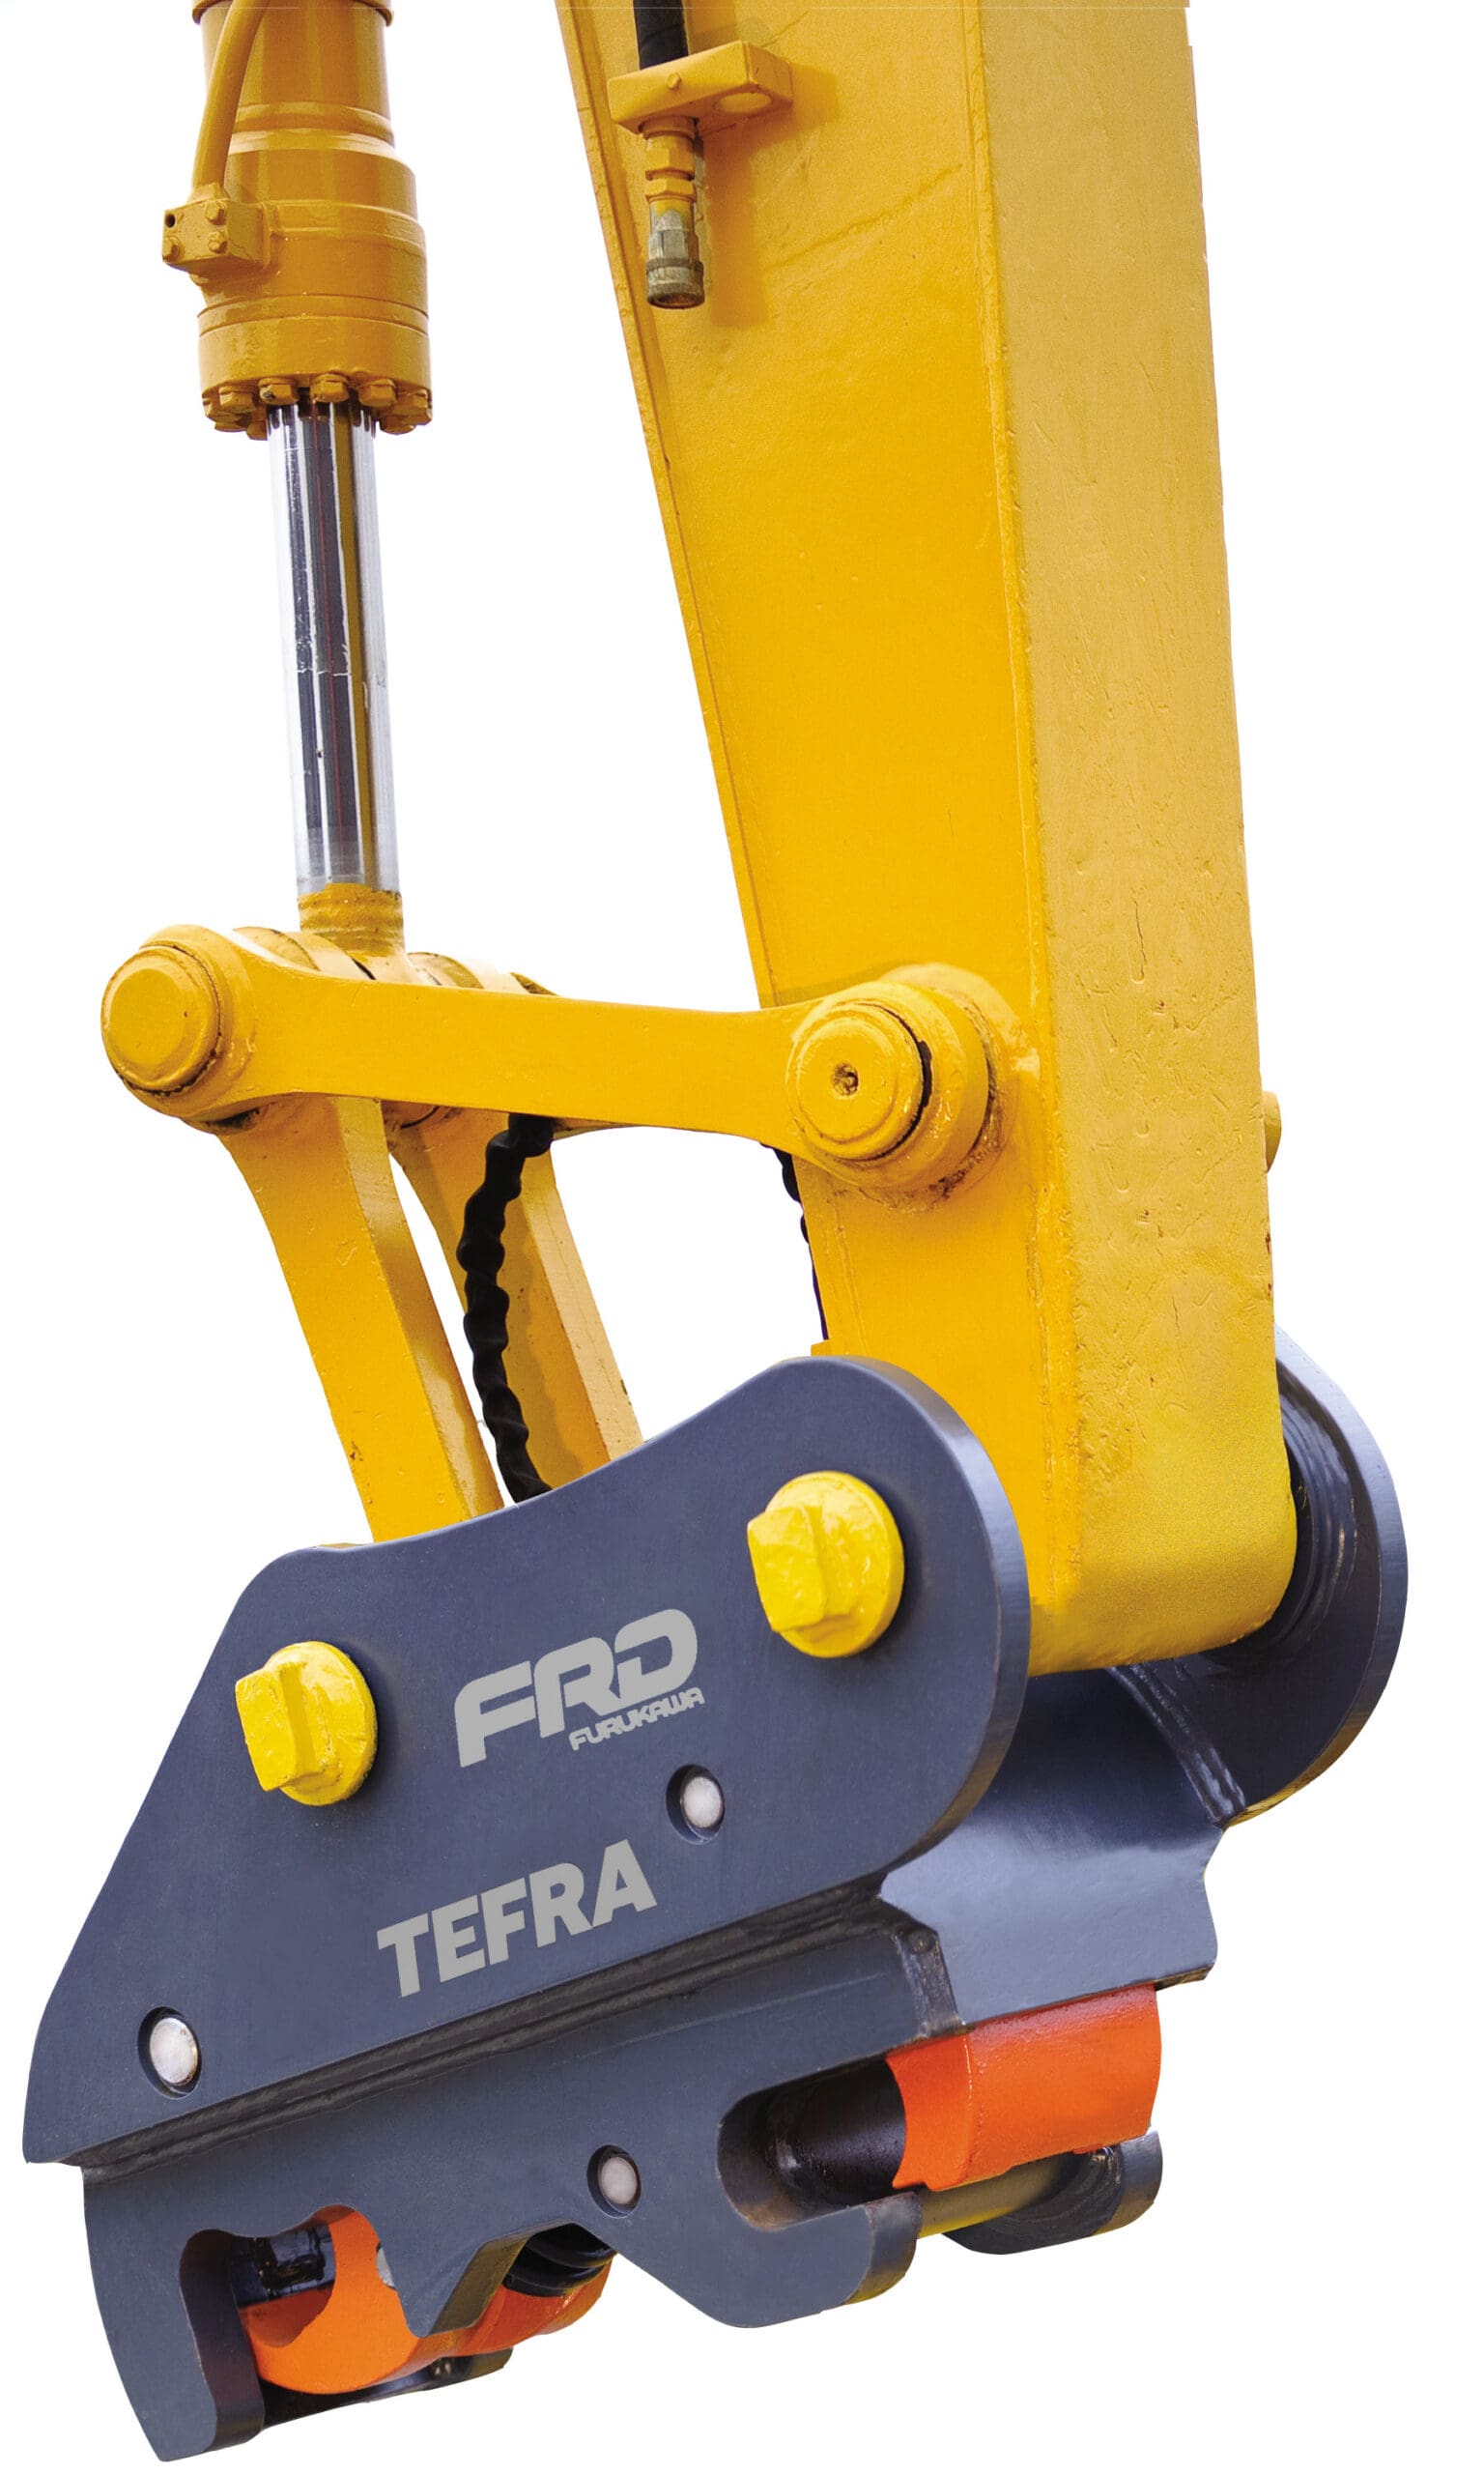 The dual safety features of the TEFRA auto couplers from Furukawa FRD are unique within the attachment industry.